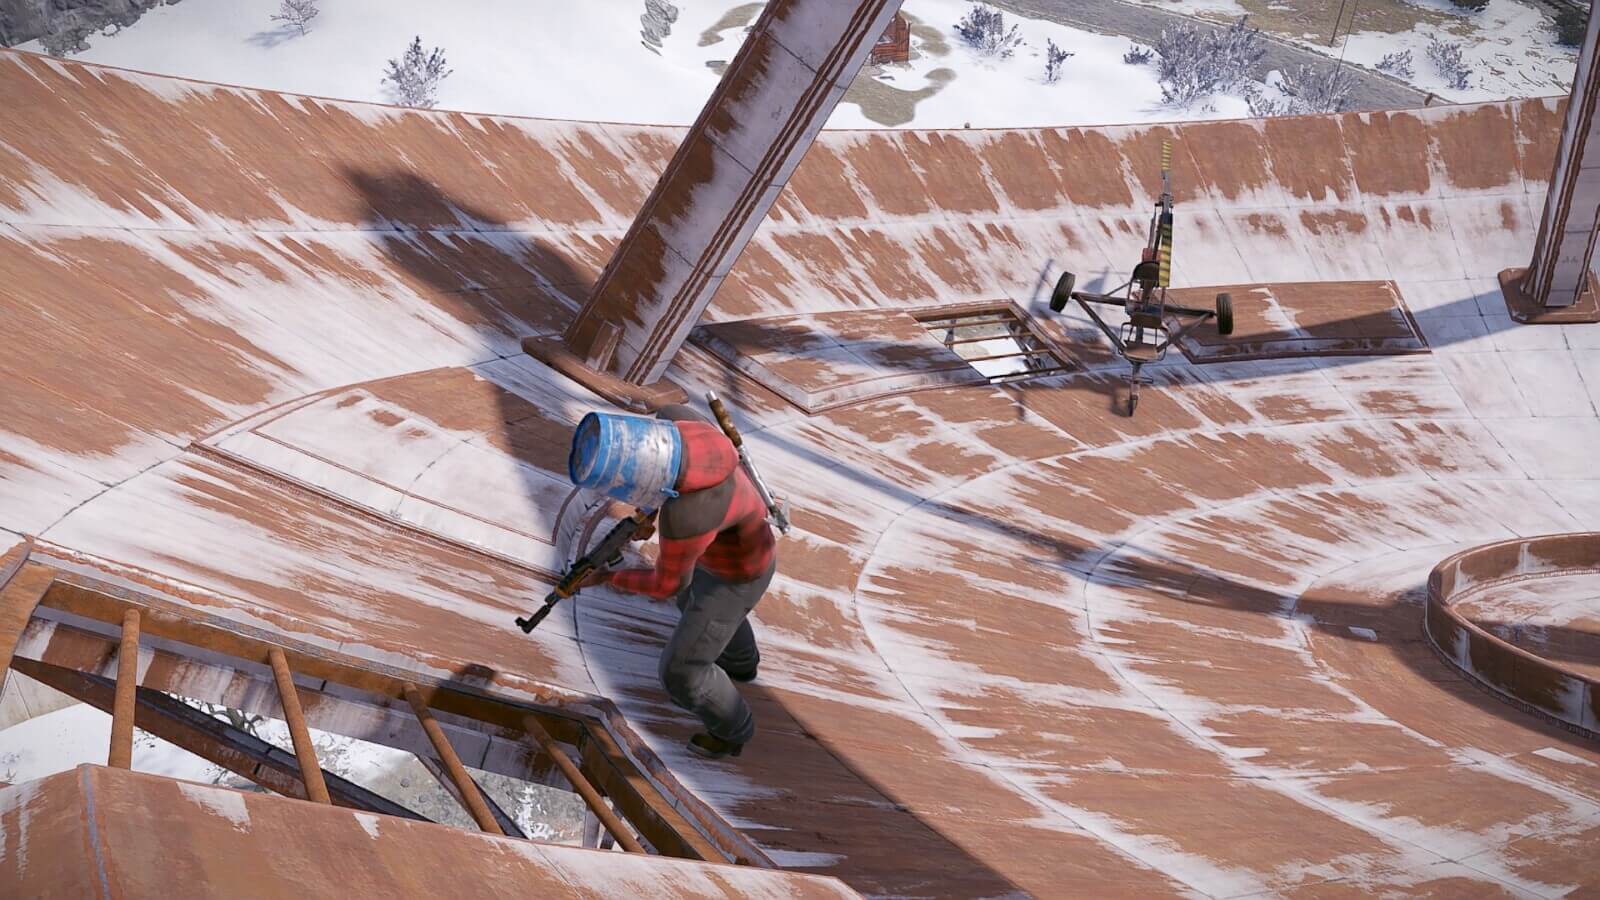 Example of a player landing on top of the satellite dish with a minicopter and getting unique vantage points.